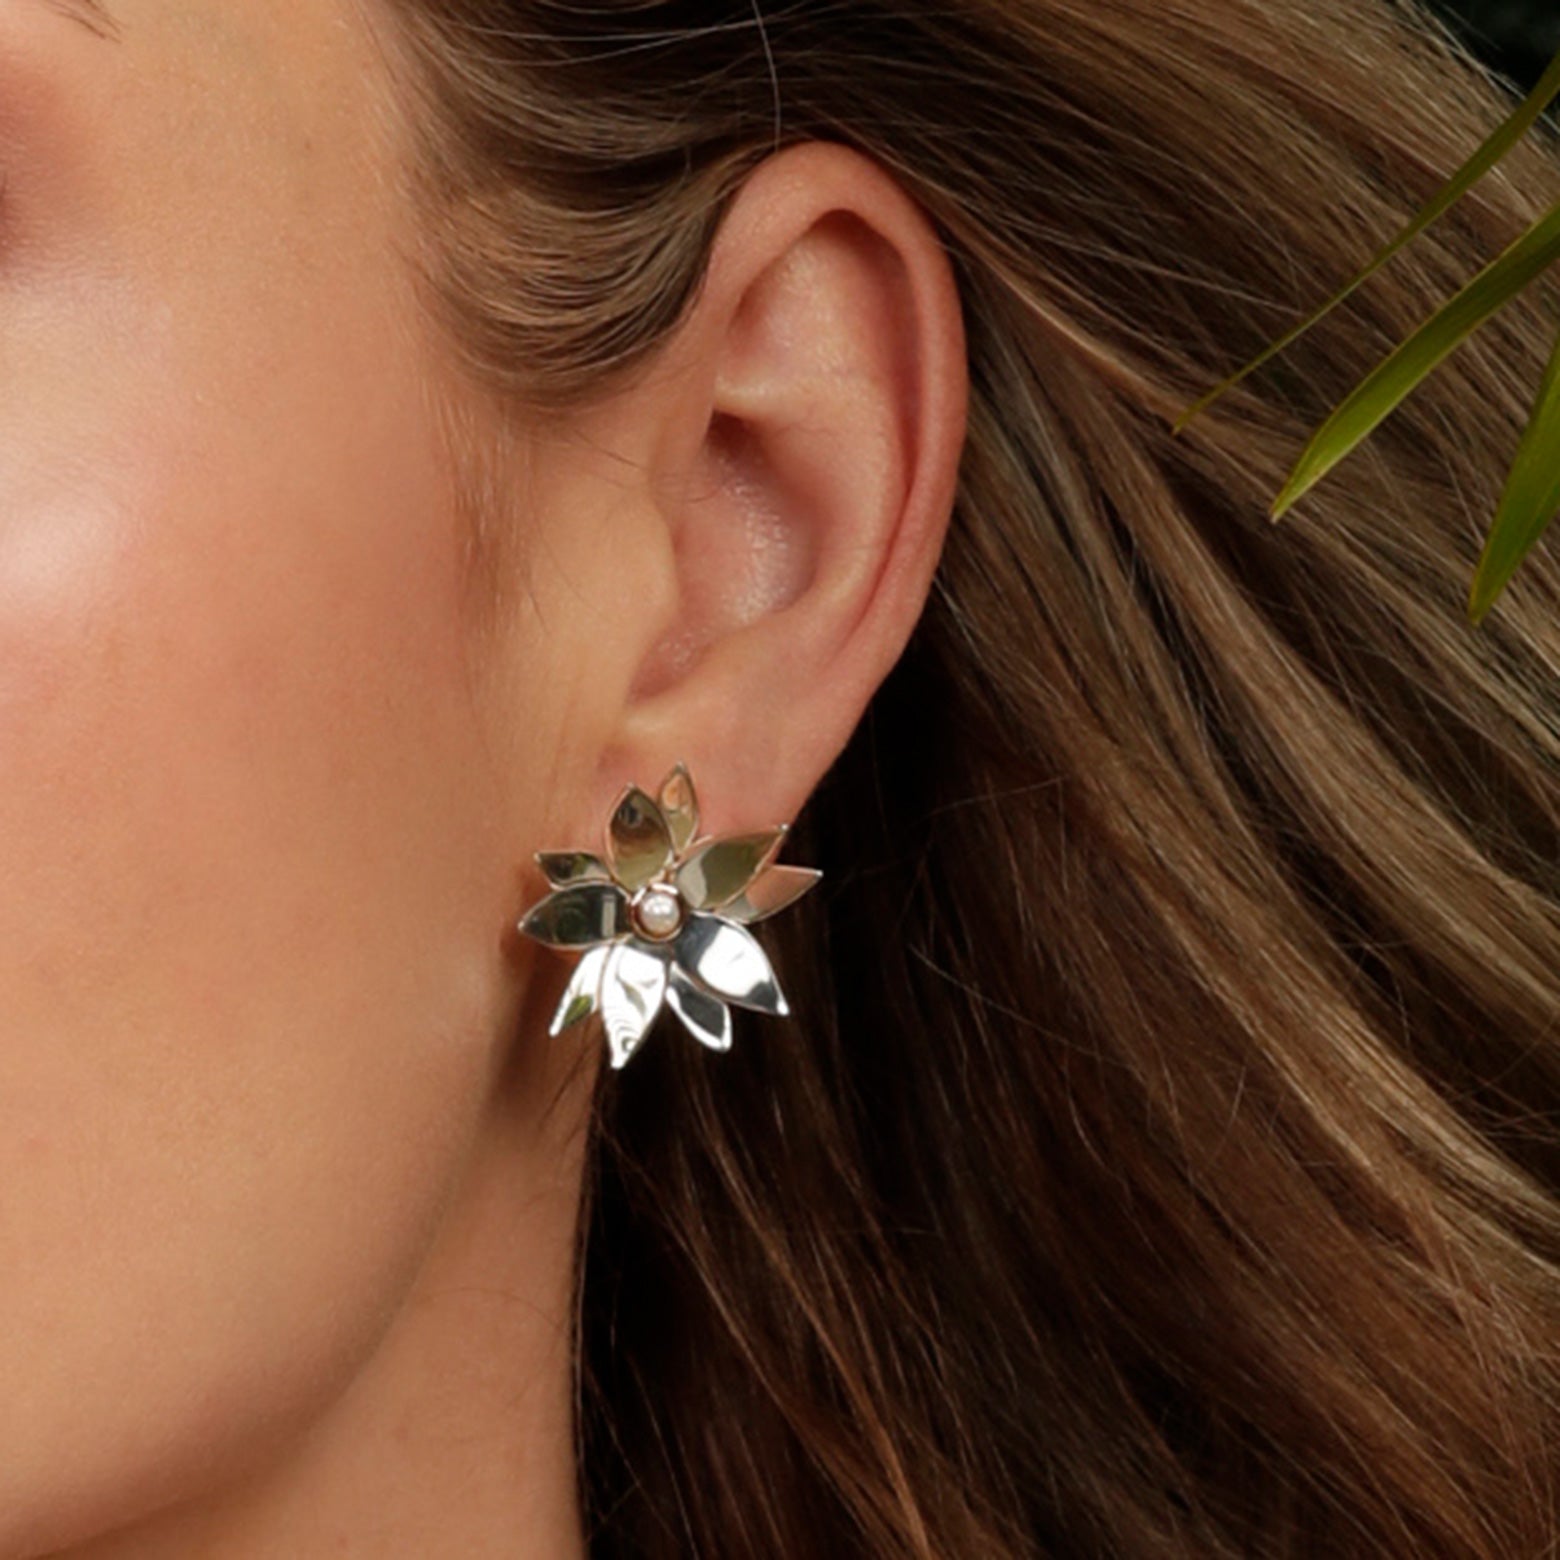 A close up of an ear wearing the Kelly Woodcroft daintree bloom earrings. They are silver and form flower shapes with a rose-gold set pearl in the centre.